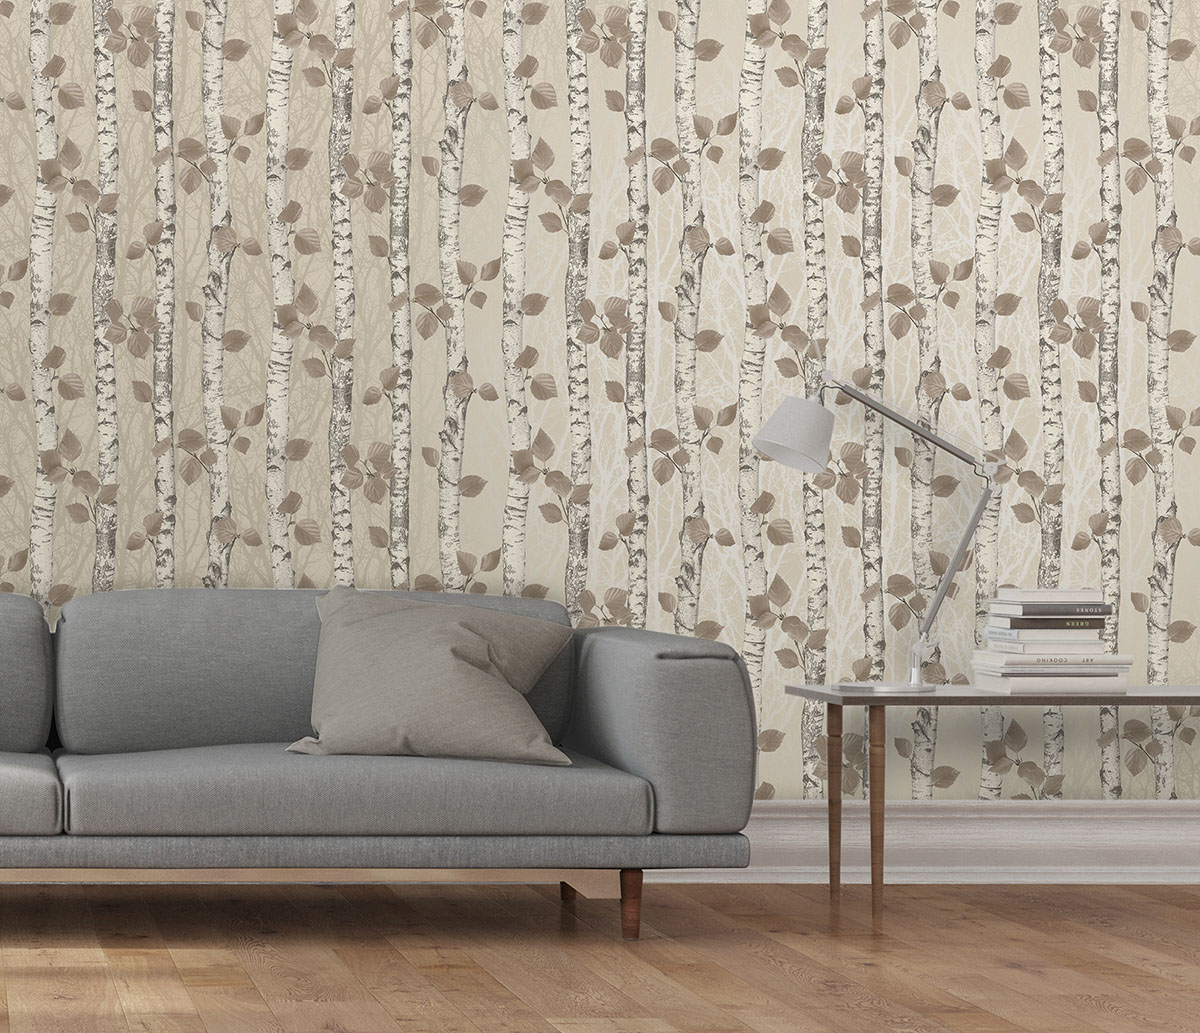 Birchwood Taupe Glitter Wallpaper |Wallpaper And Borders |The Mural Store